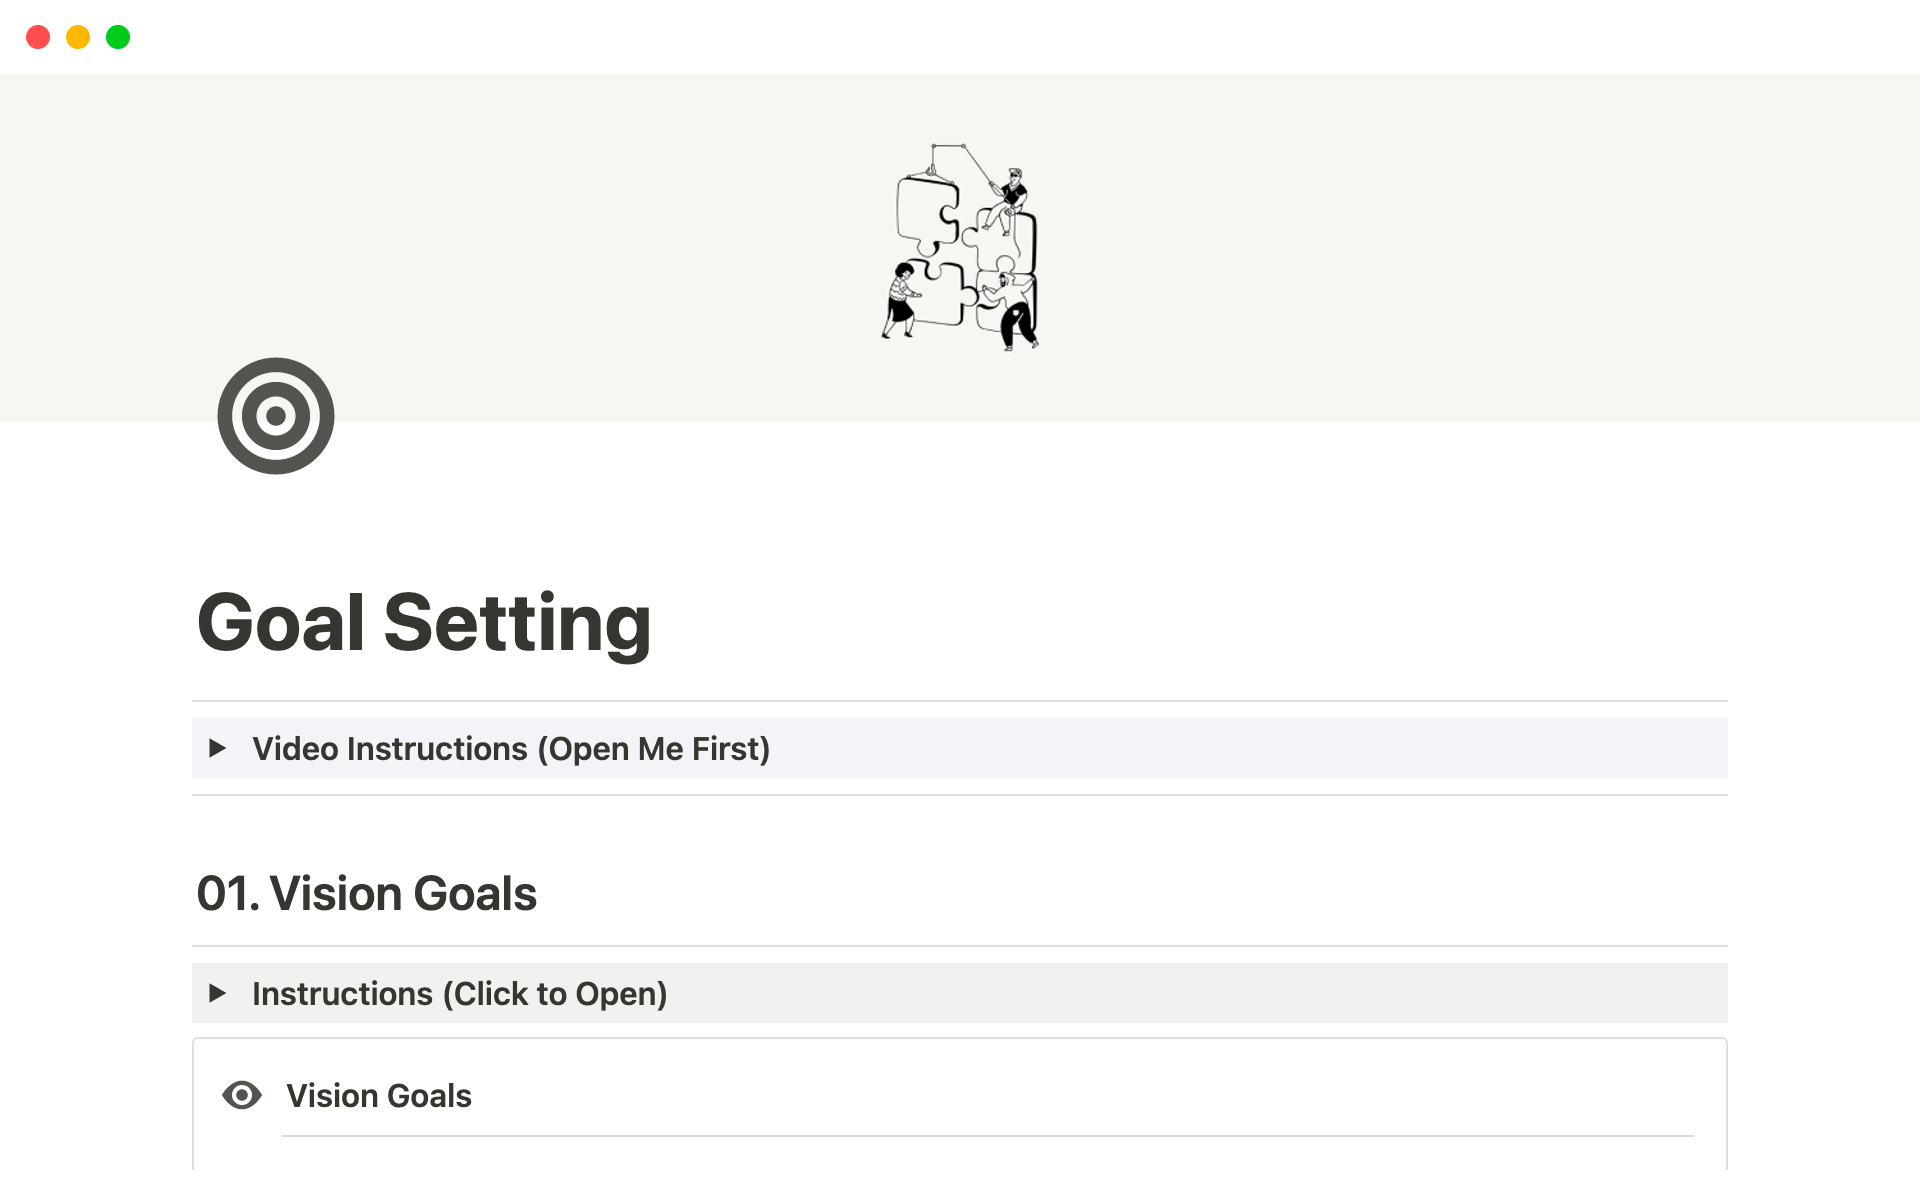 Ensure you are always workign towards your big vision and annual goals with this Notion goal-setting template.